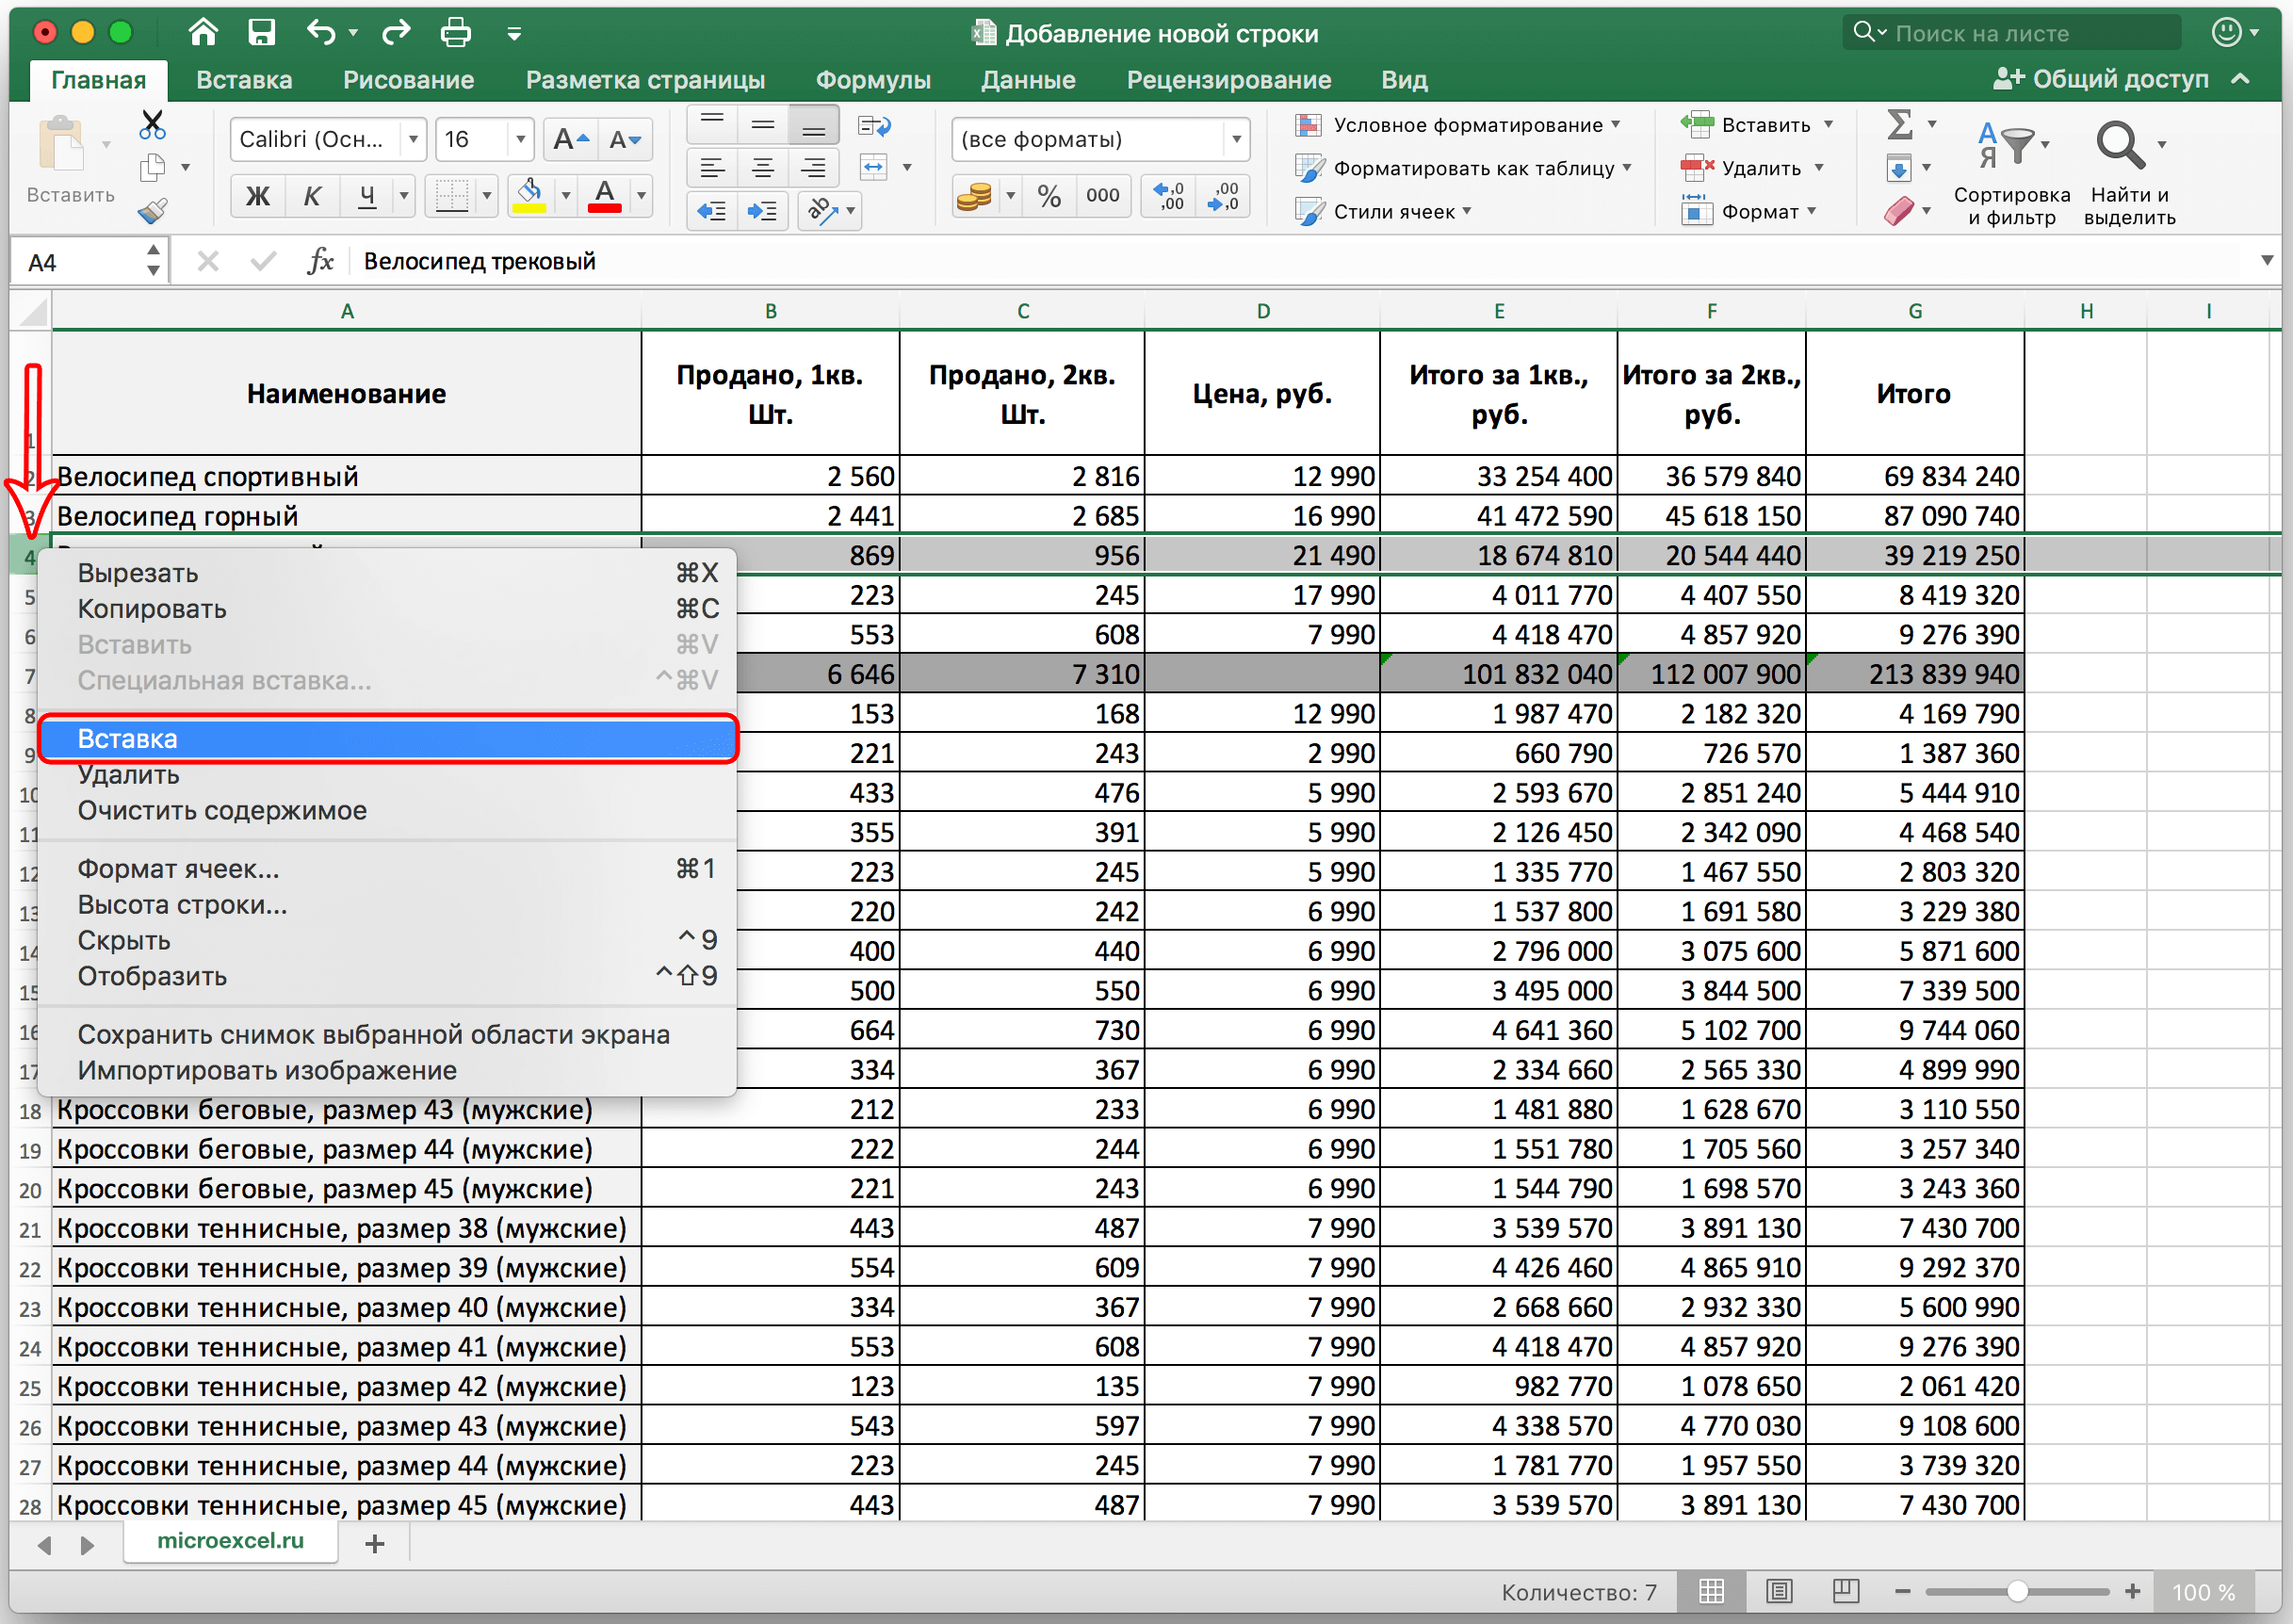 How to add a new row in Excel